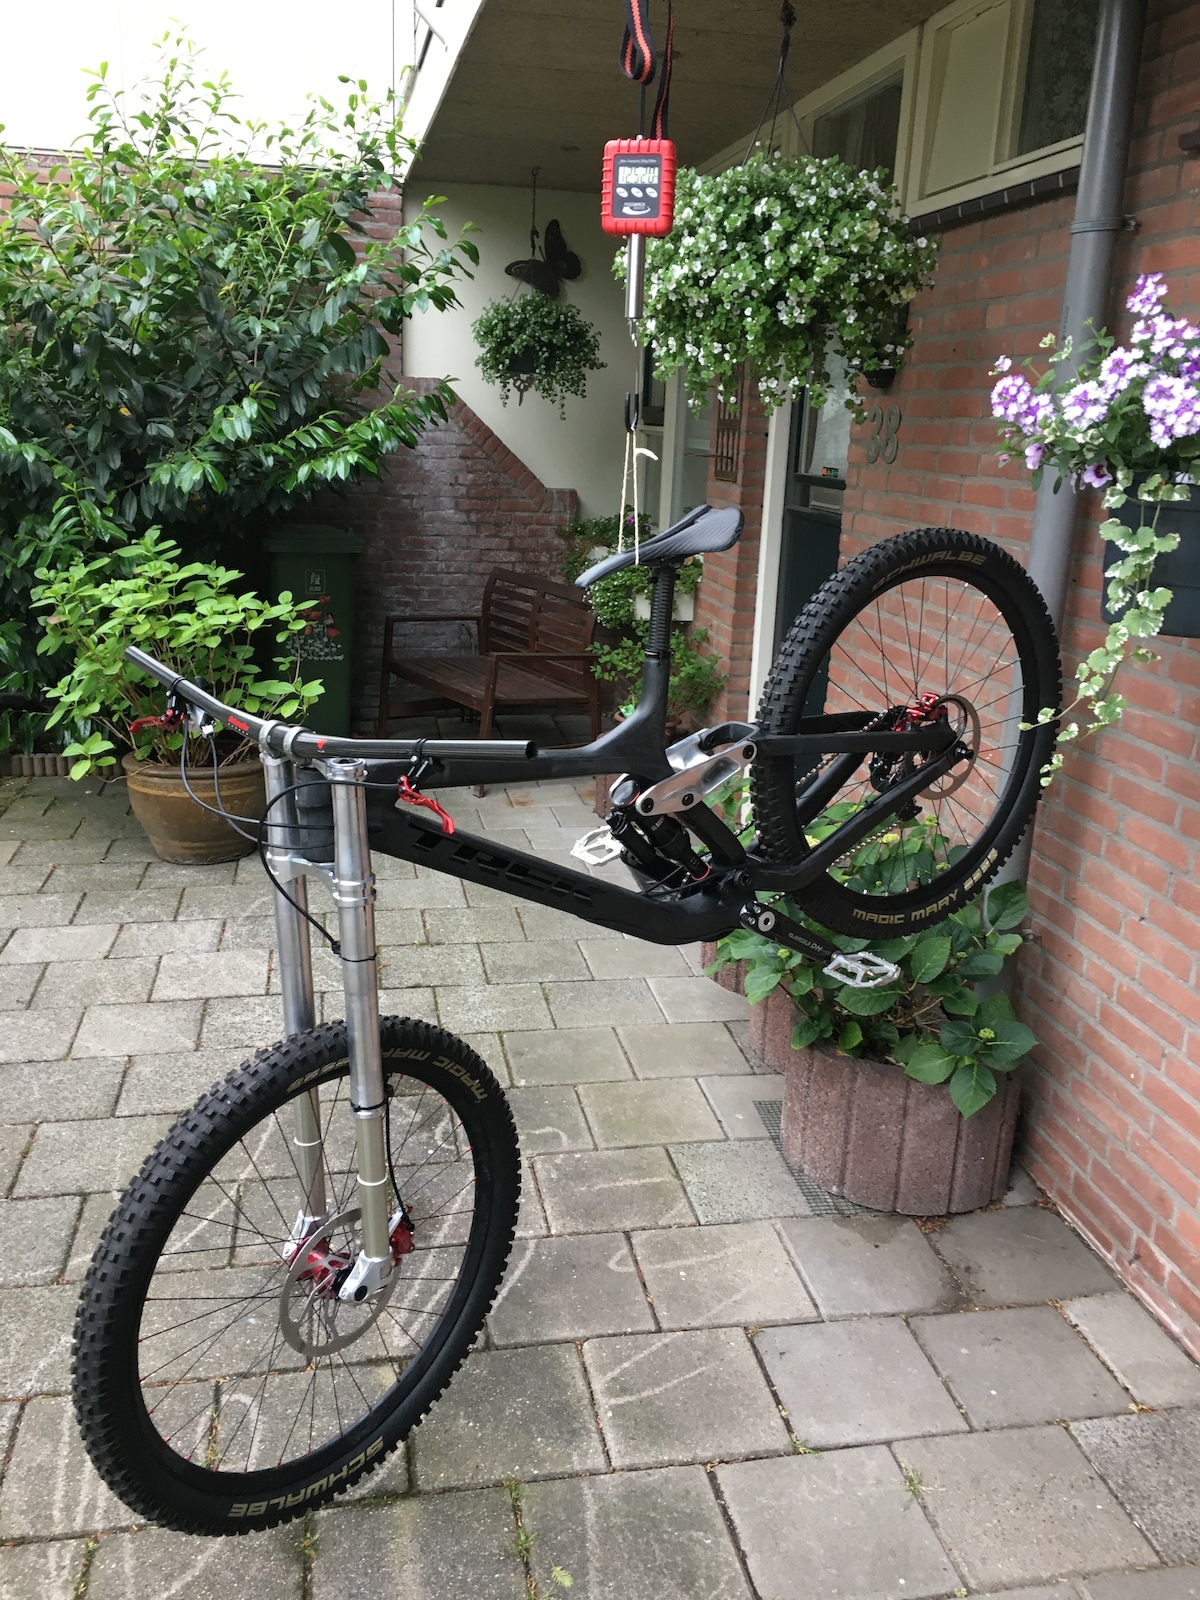 Session lightest DH bike project, 12,520kg with pedals, only missing grips, need to cut bars, maybe shorten chain more, change chainring to a lichter one to get it below 12,5kg